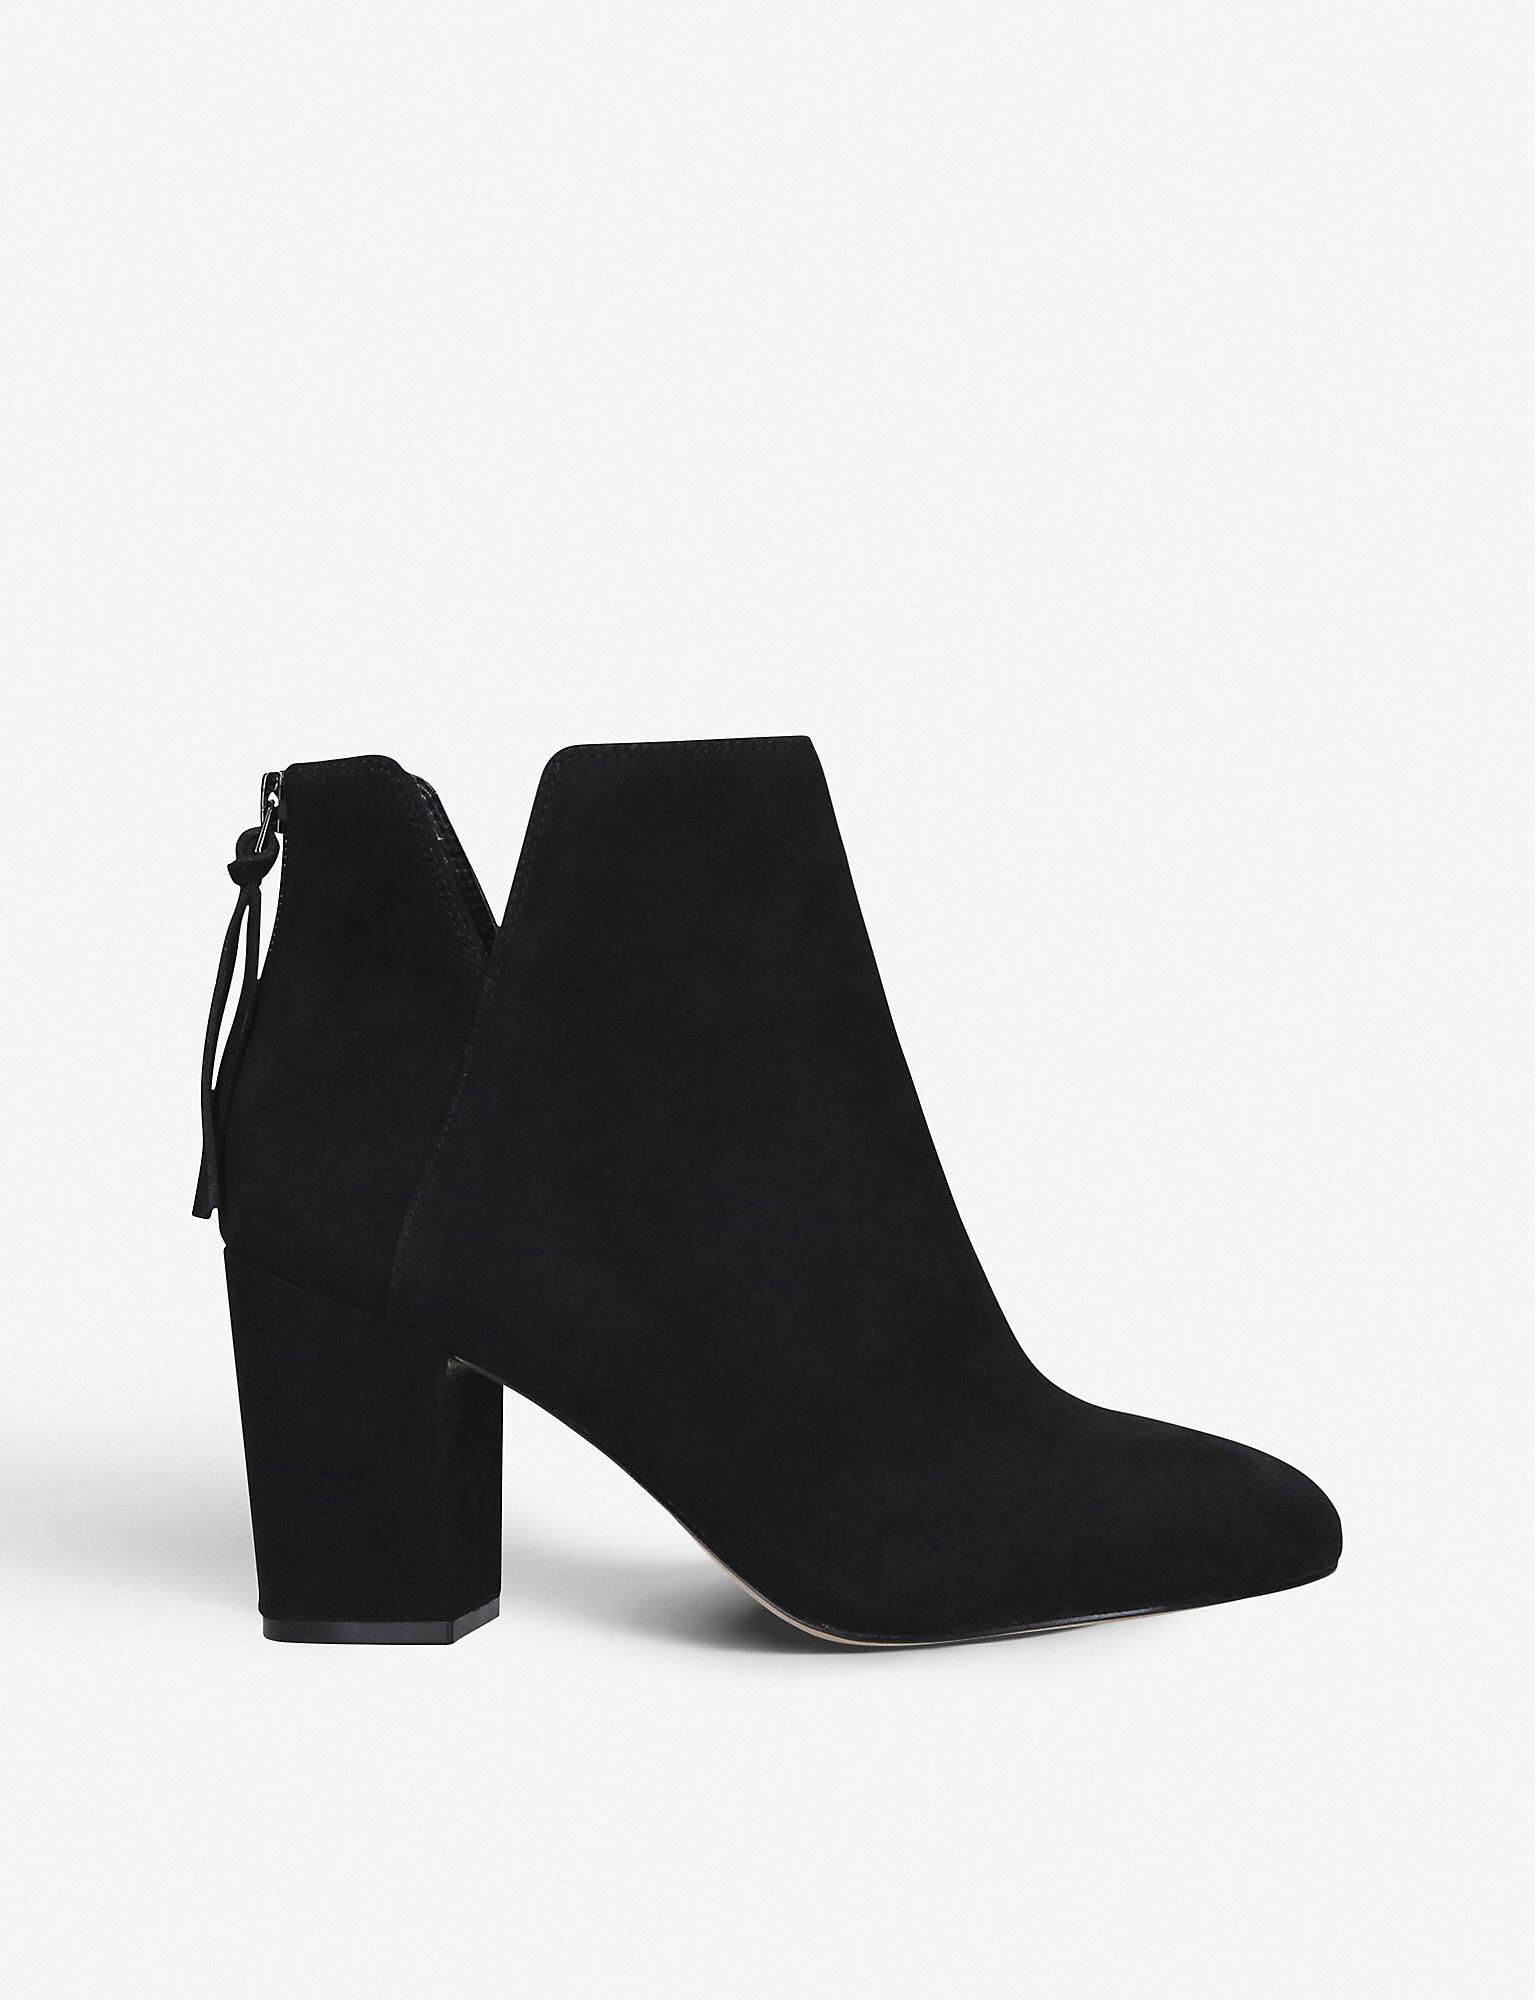 ALDO Dominicaa Suede Ankle Boots in Black Suede (Black) - Save 1% - Lyst